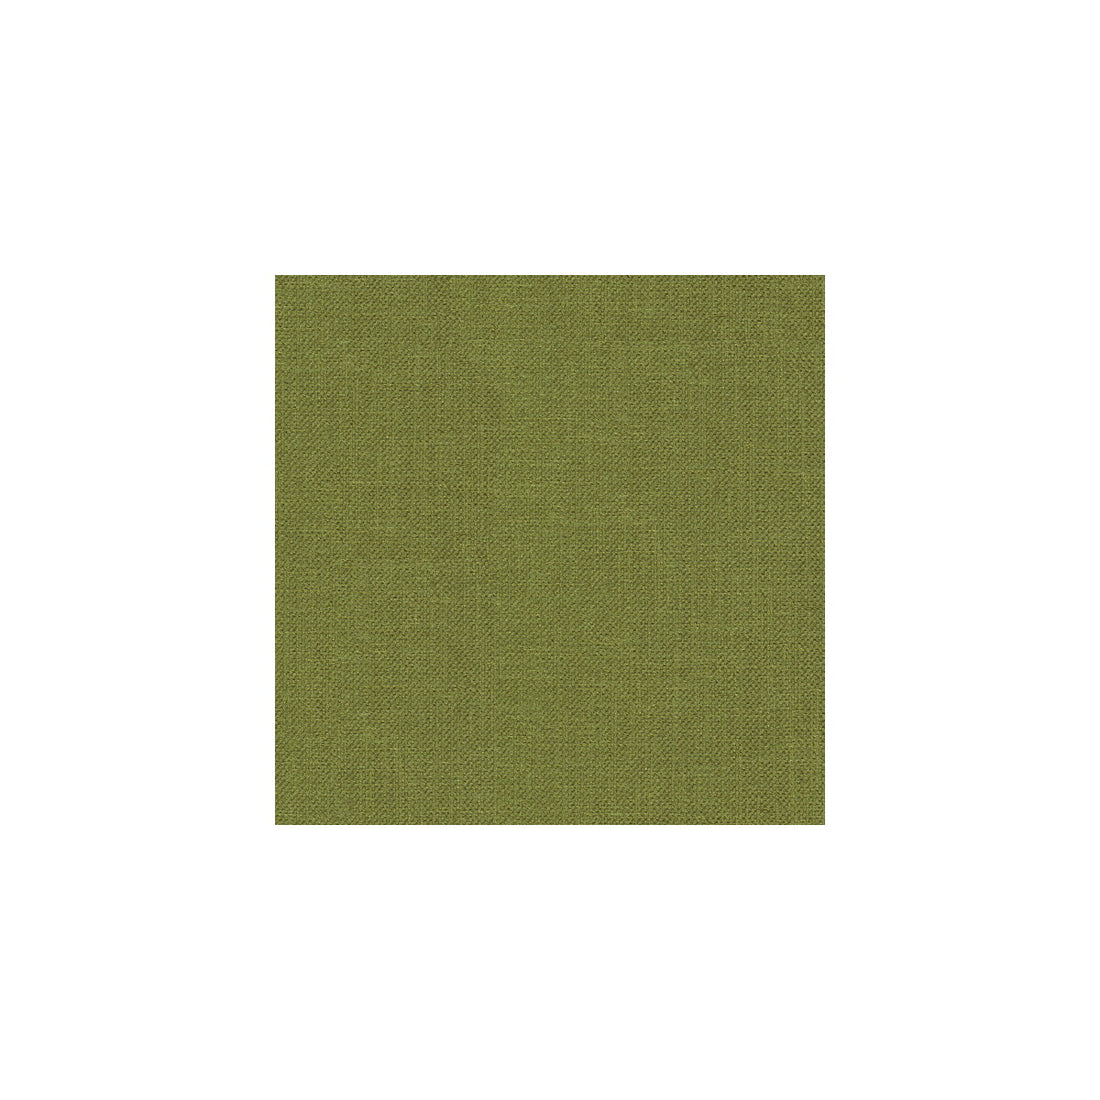 Kravet Basics fabric in 33120-3 color - pattern 33120.3.0 - by Kravet Basics in the Perfect Plains collection